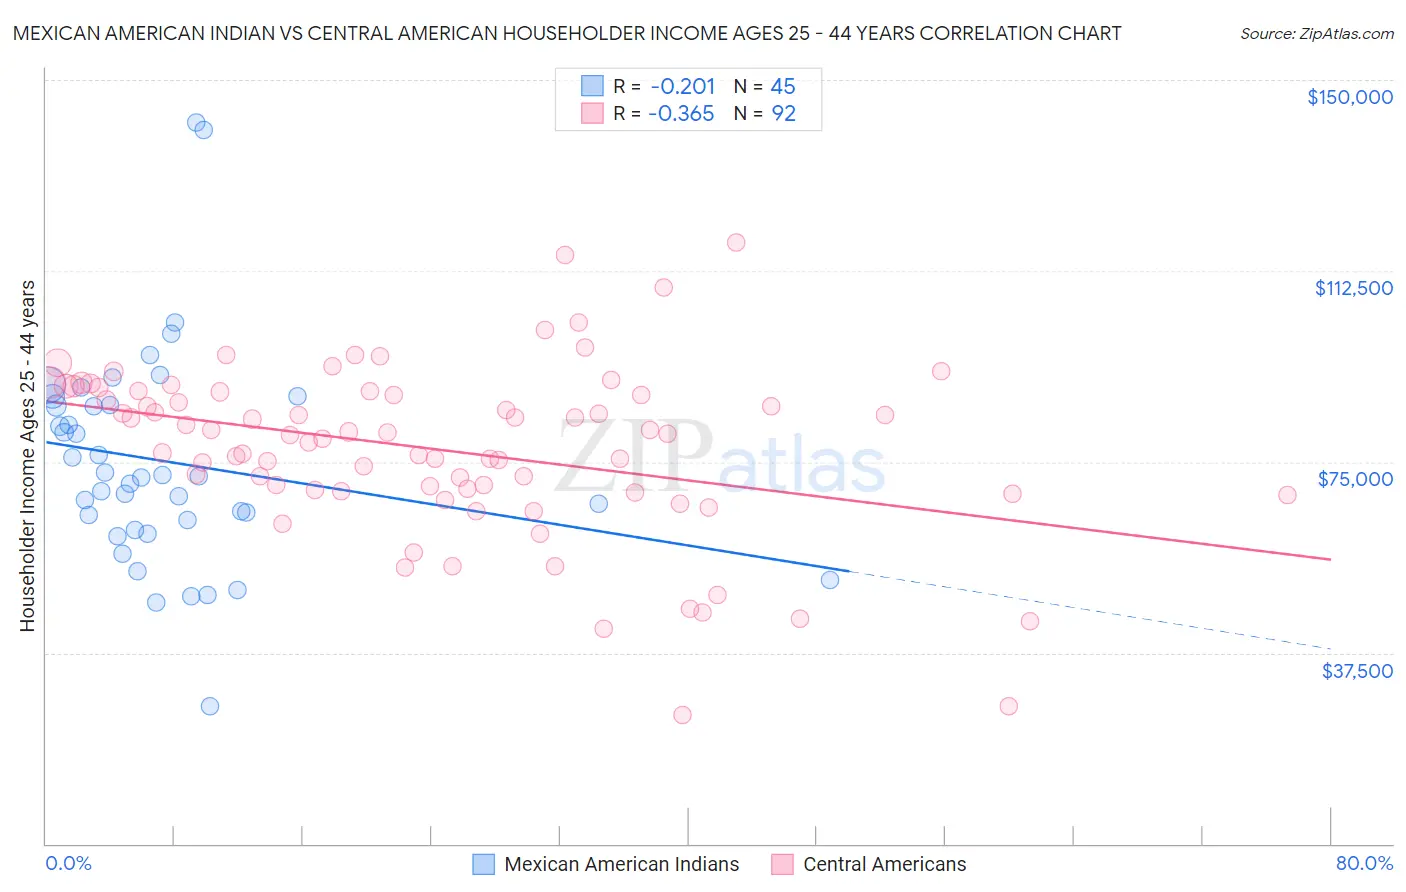 Mexican American Indian vs Central American Householder Income Ages 25 - 44 years